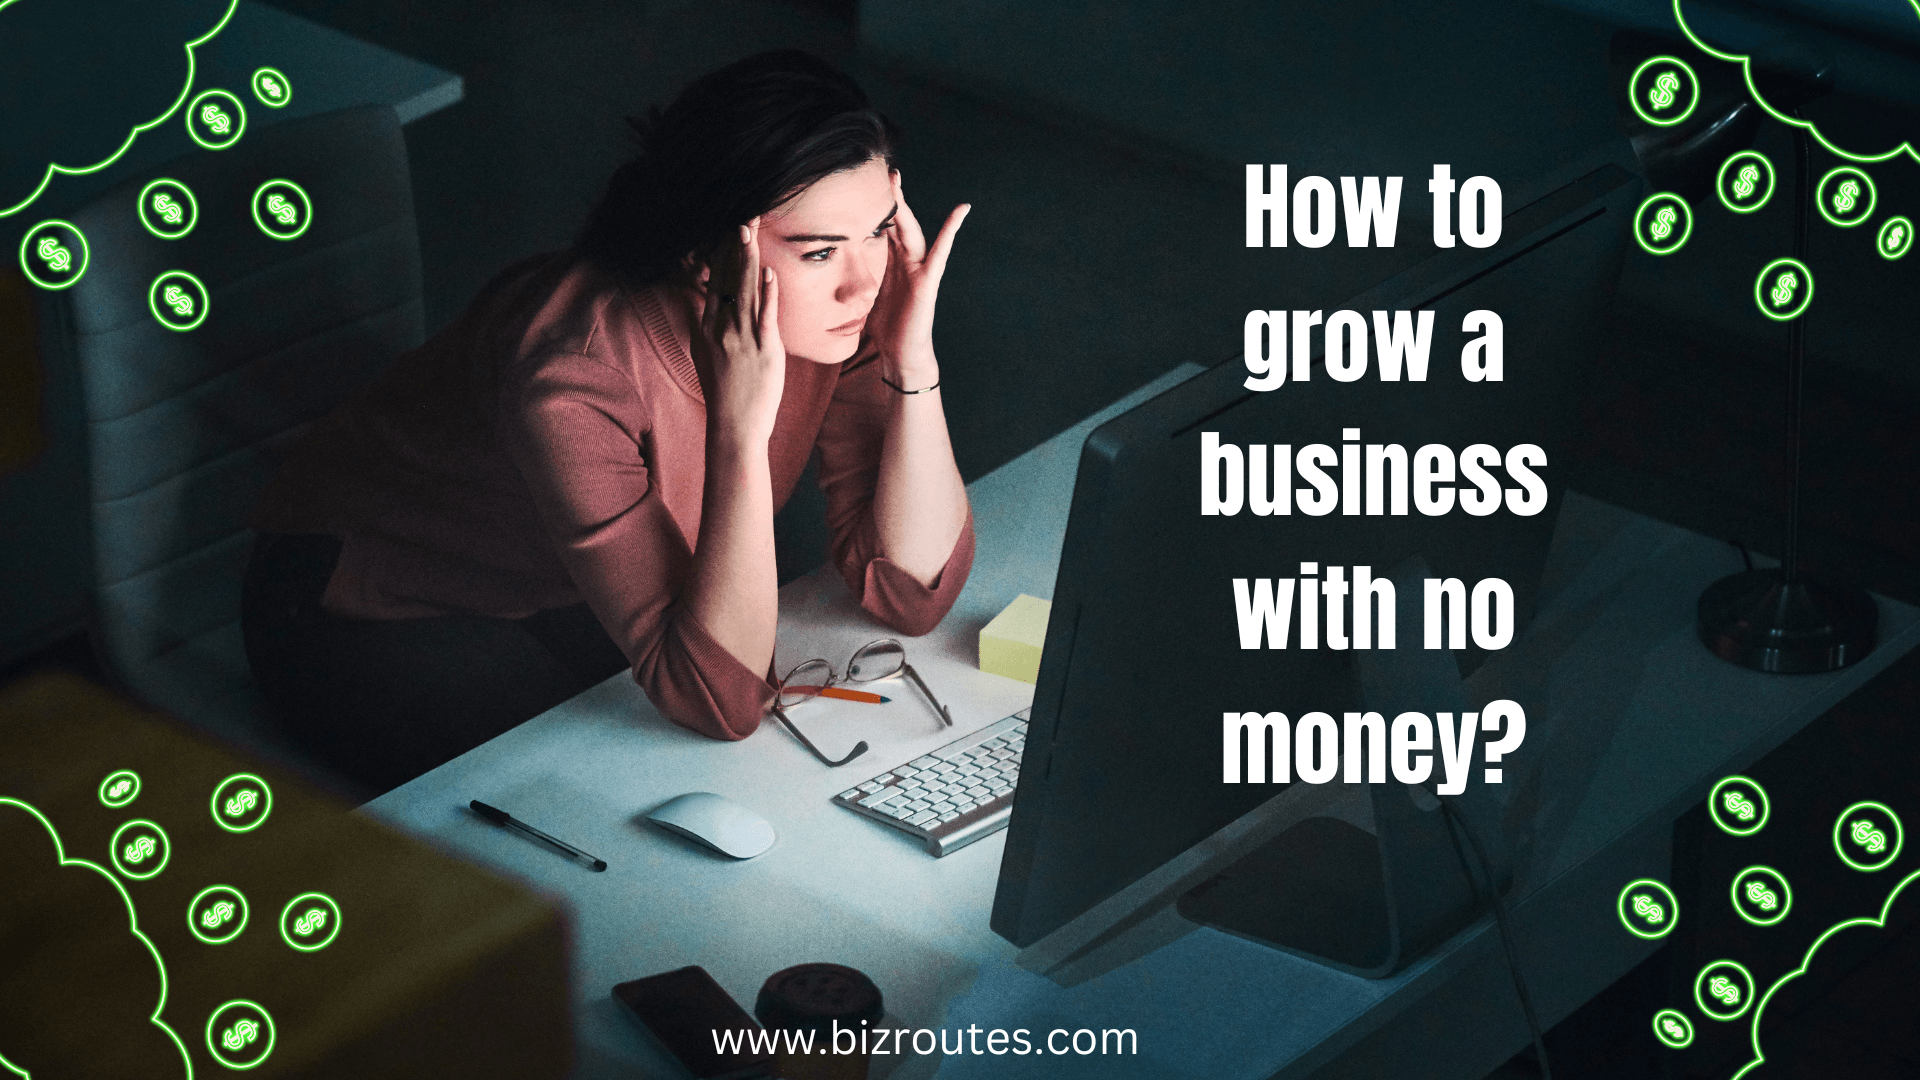 How to grow a business with no money